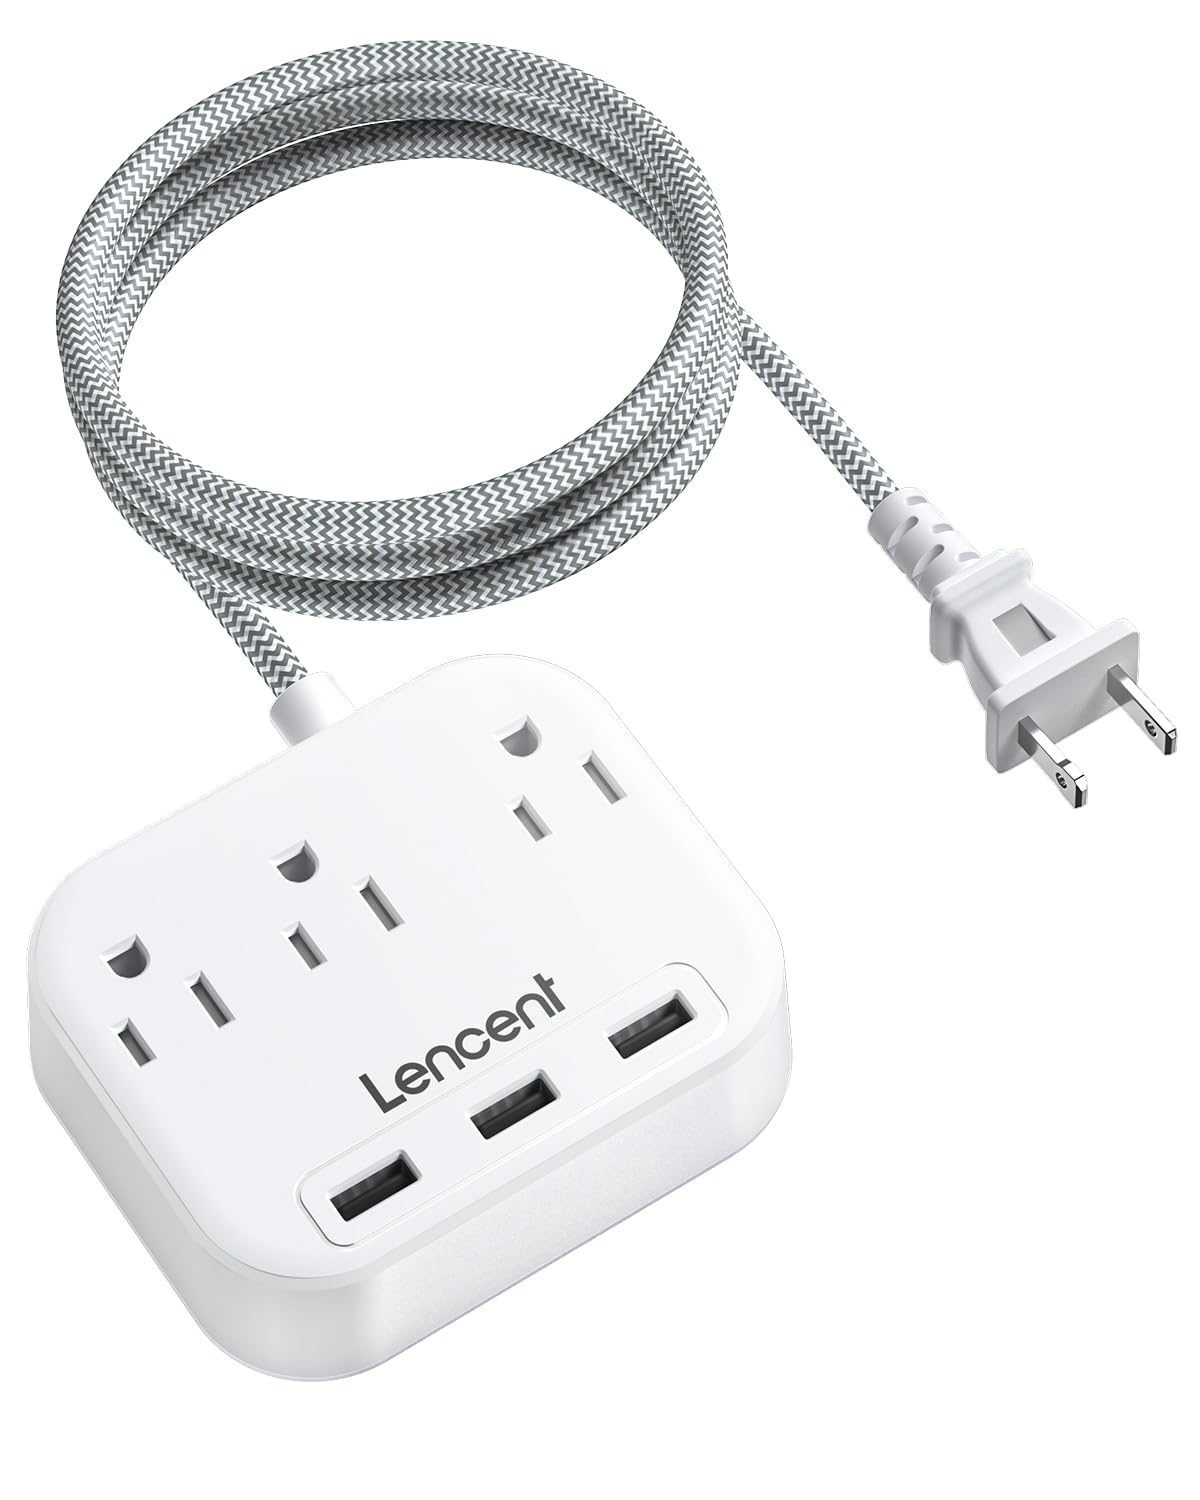 LENCENT 2 Prong Power Strip, 3 Prong to 2 Prong Outlet Adapter, 6.6ft Braided Extension Cord with Polarized Plug, 3 AC Outlets &